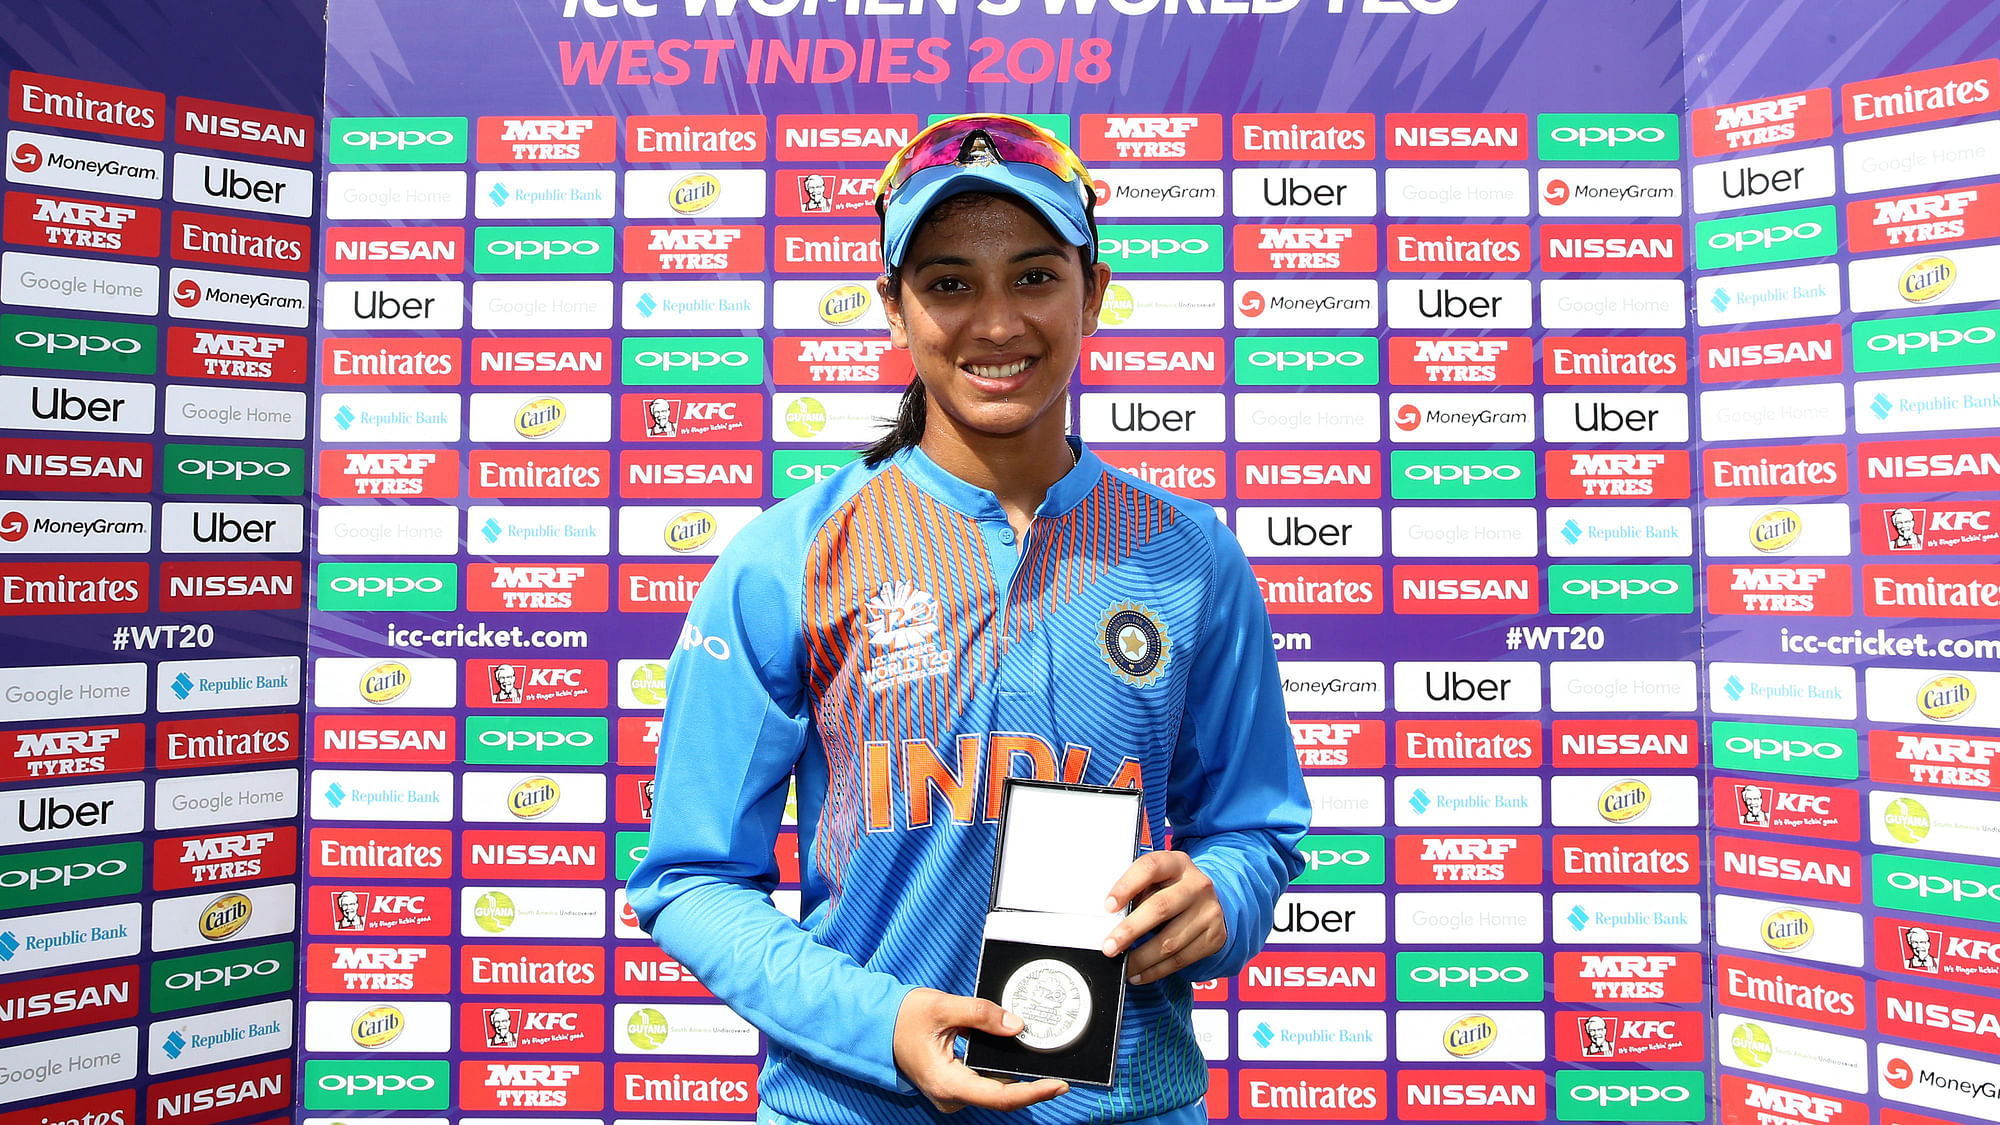 Smriti Mandhana will lead the Indian women’s team in their three-match T20I series against England at home.